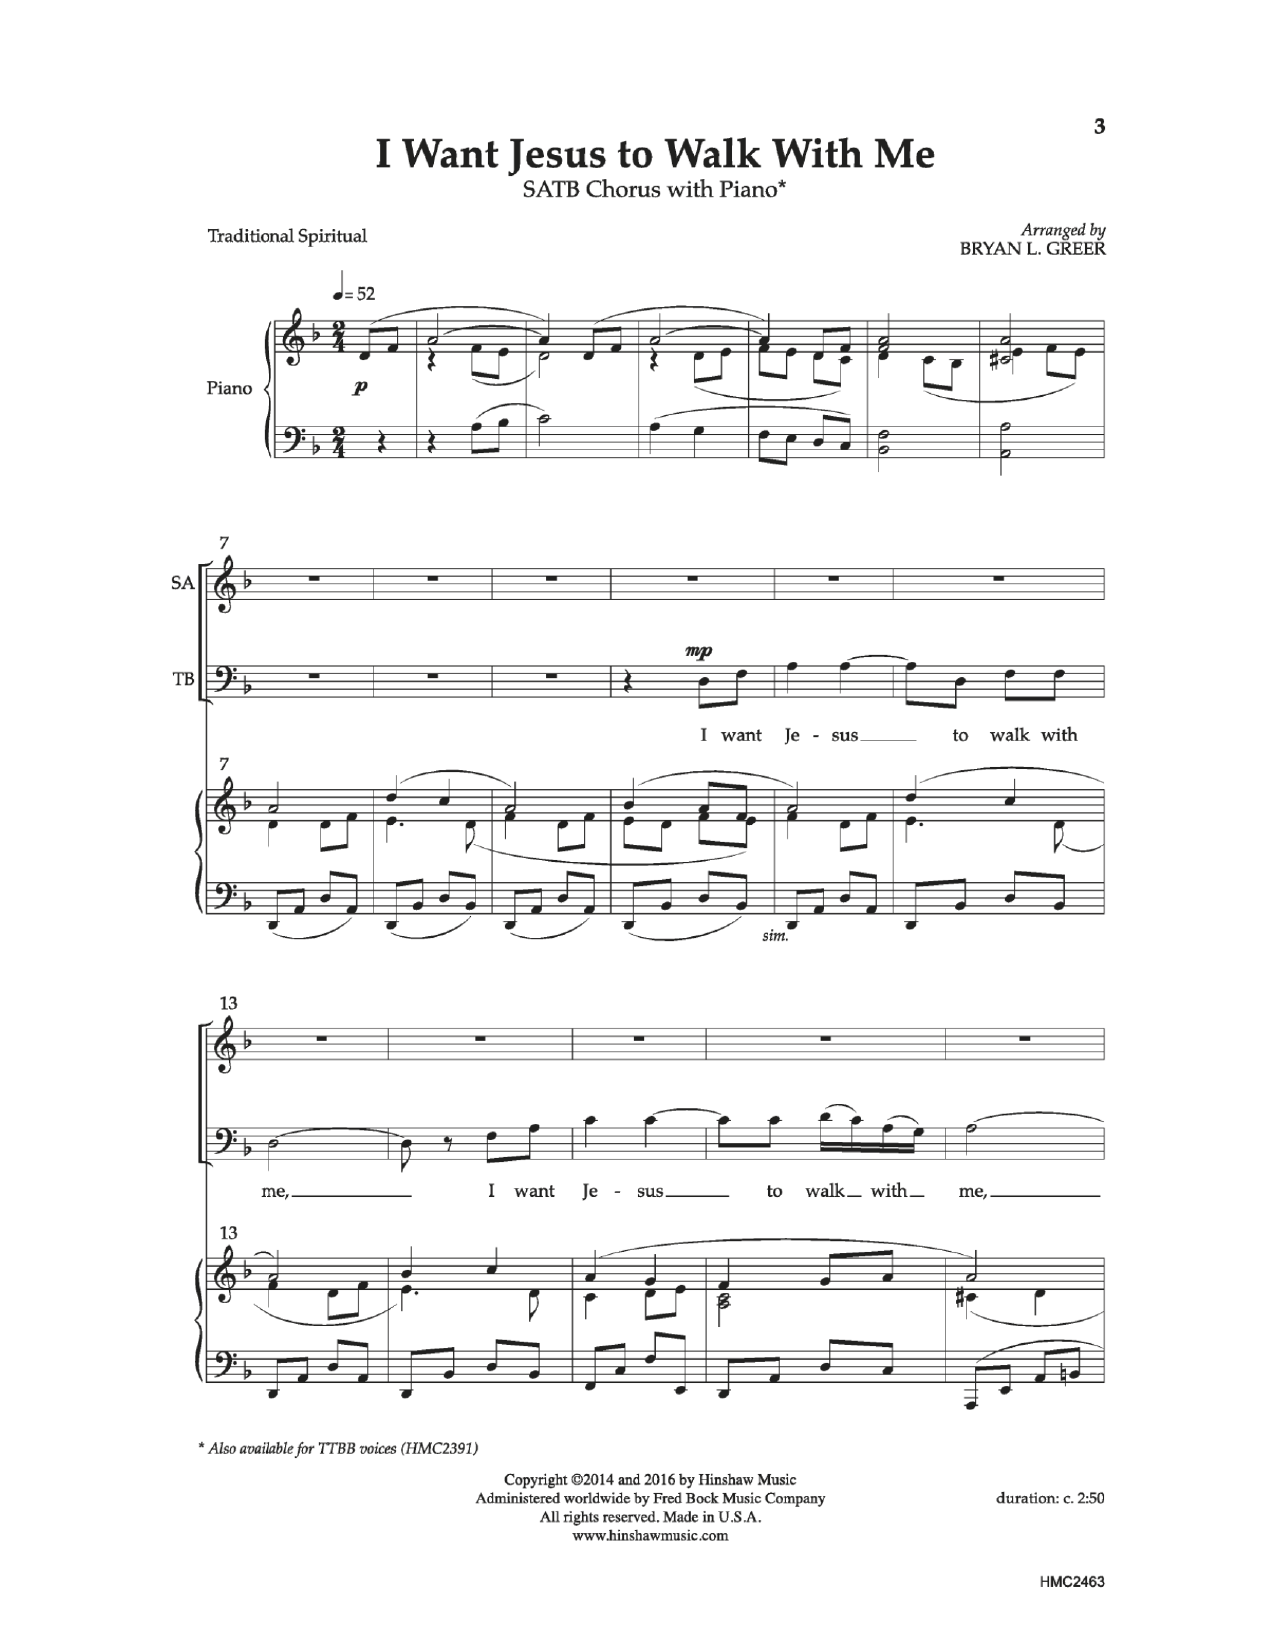 Download Bryan Greer I Want Jesus To Walk With Me Sheet Music